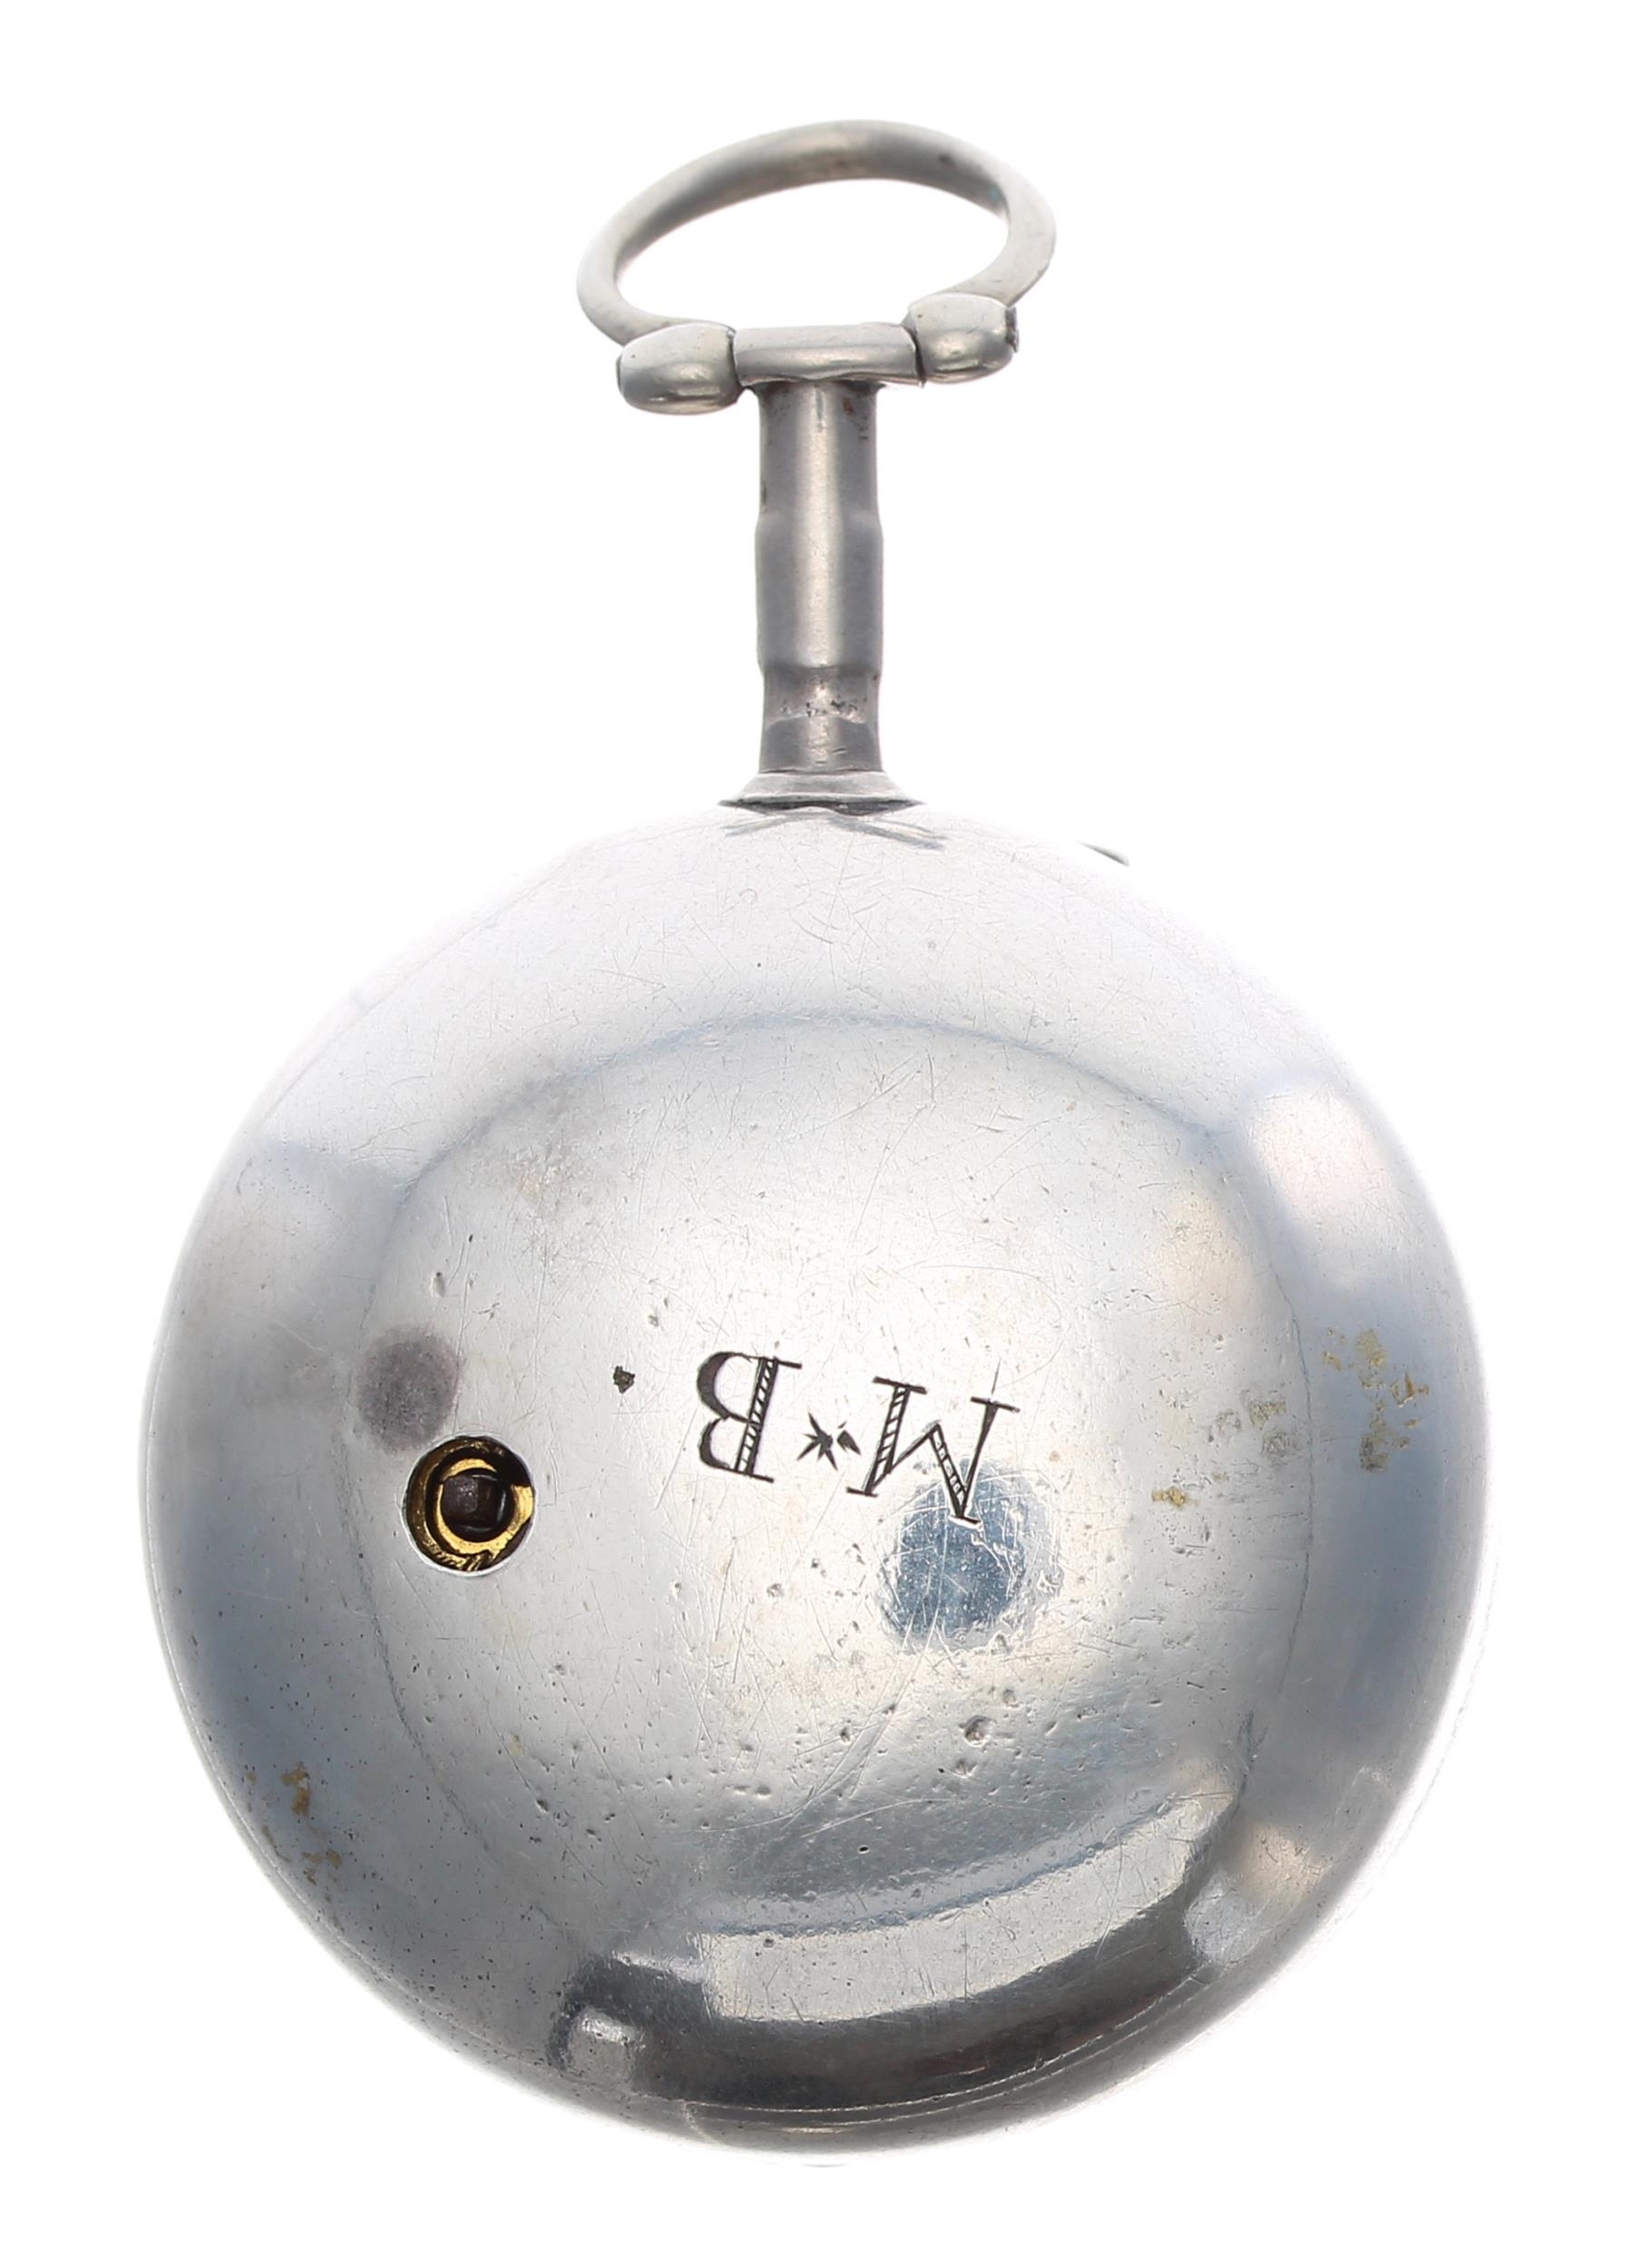 George III English silver pair cased verge pocket watch, London 1765, the fusee movement signed Thos - Image 4 of 6